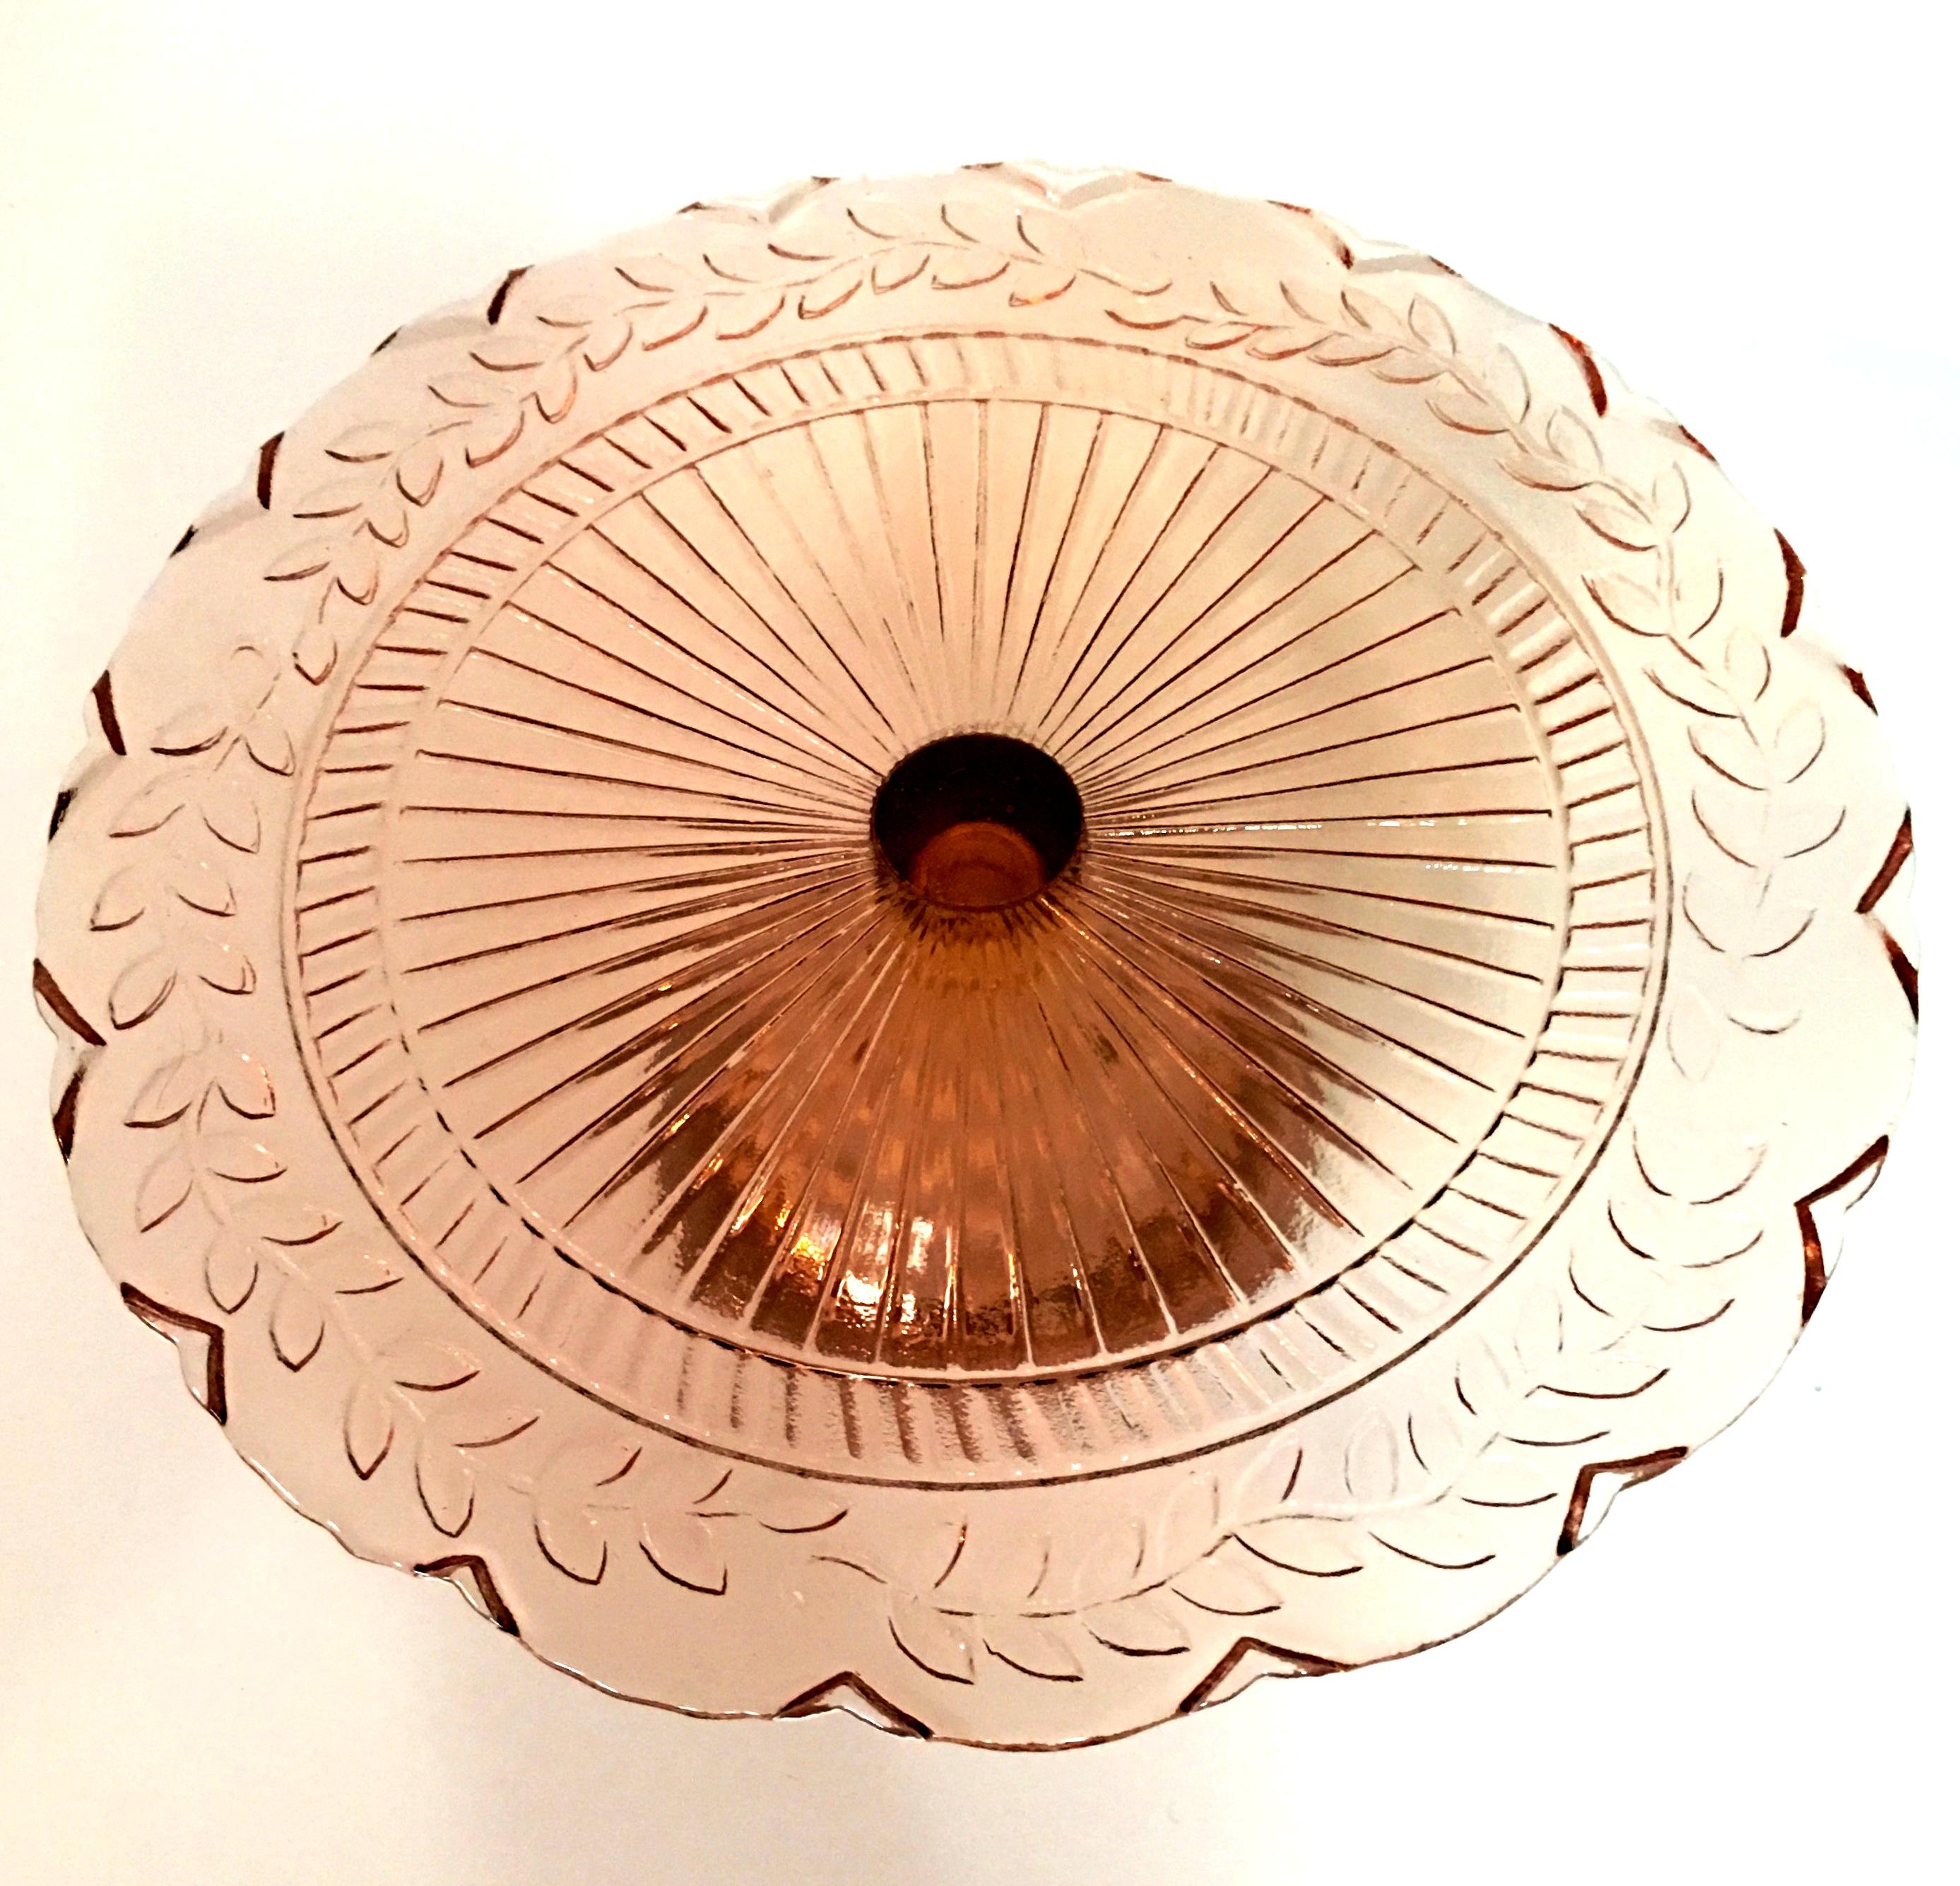 Mid-20th century American pink depression glass pedestal cake plate. Features a laurel leaf motif with scalloped edge.